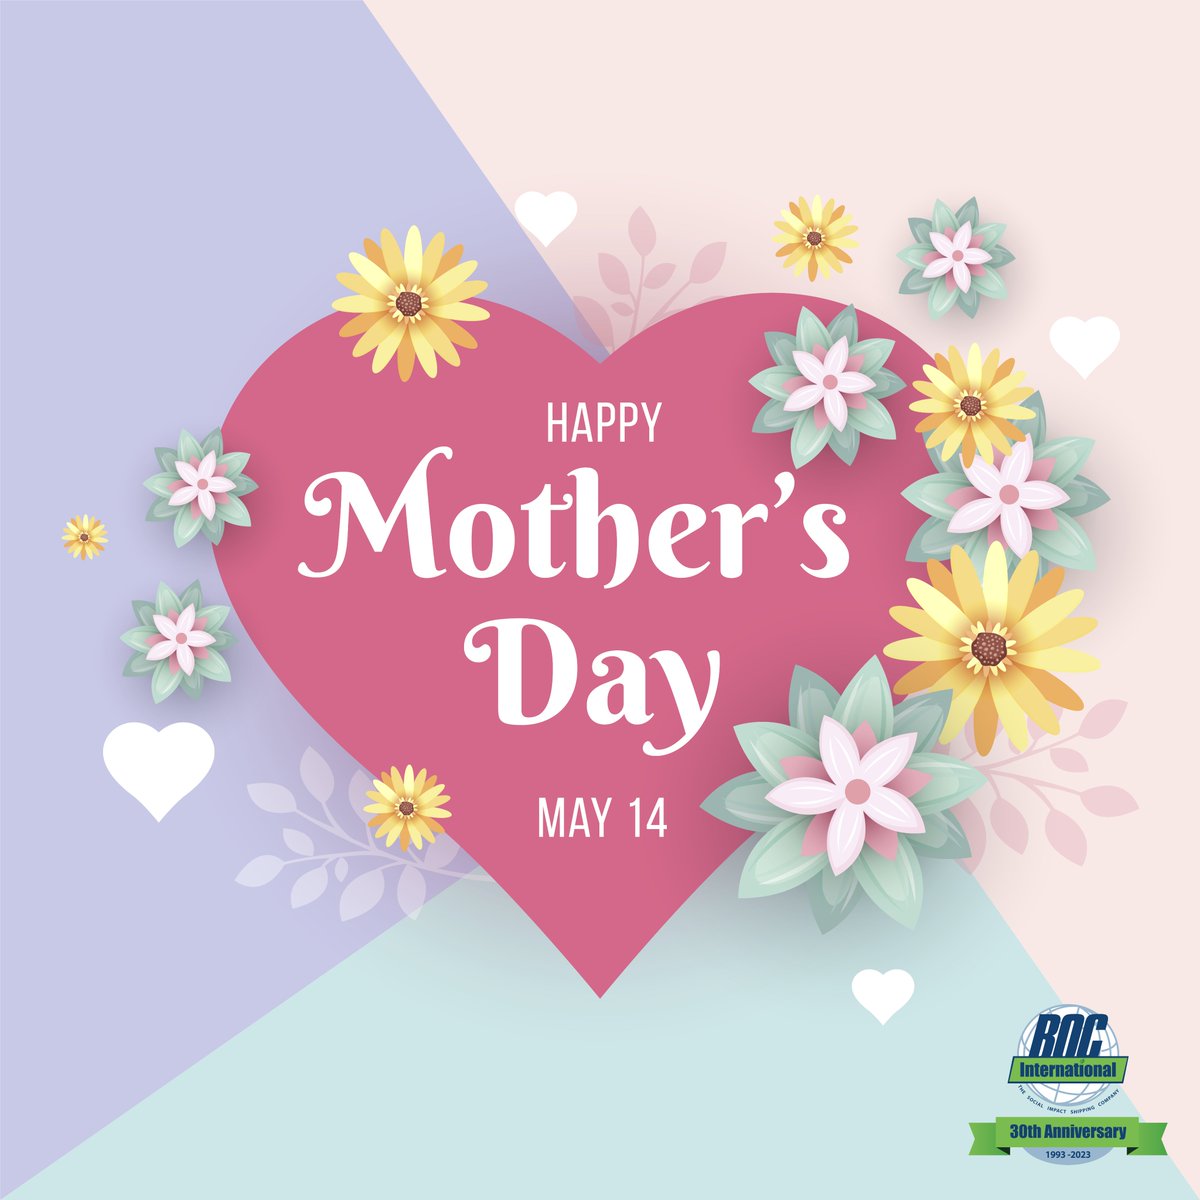 Happy Mother's Day! 💗
#mothersday #happymothersday #May14 #BOCInternational #InternationalLogistics #DomesticServices #OseanServices #AirServices